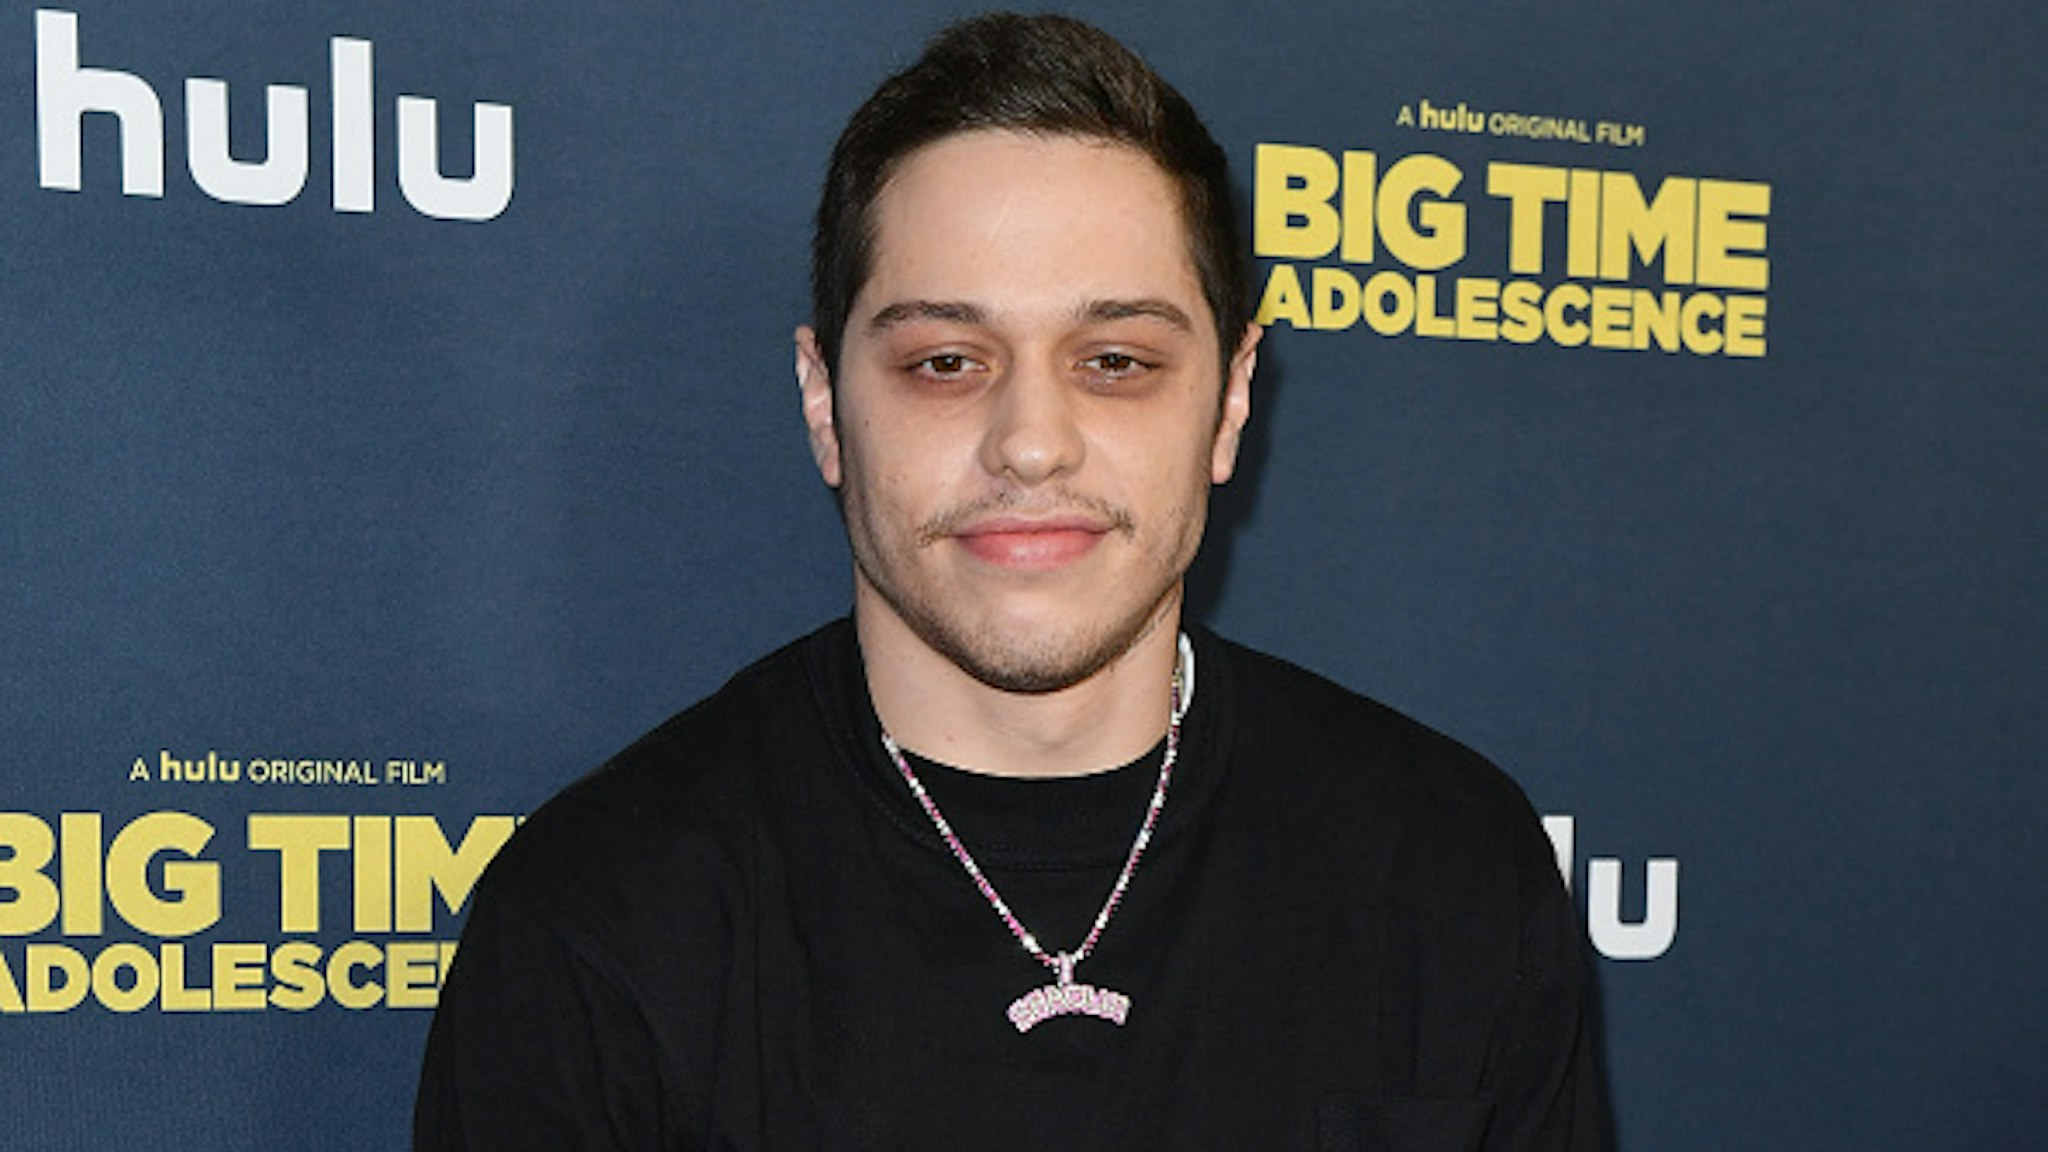 US comedian Pete Davidson attends the premiere of Hulu's "Big Time Adolescence" at Metrograph on March 5, 2020 in New York City.